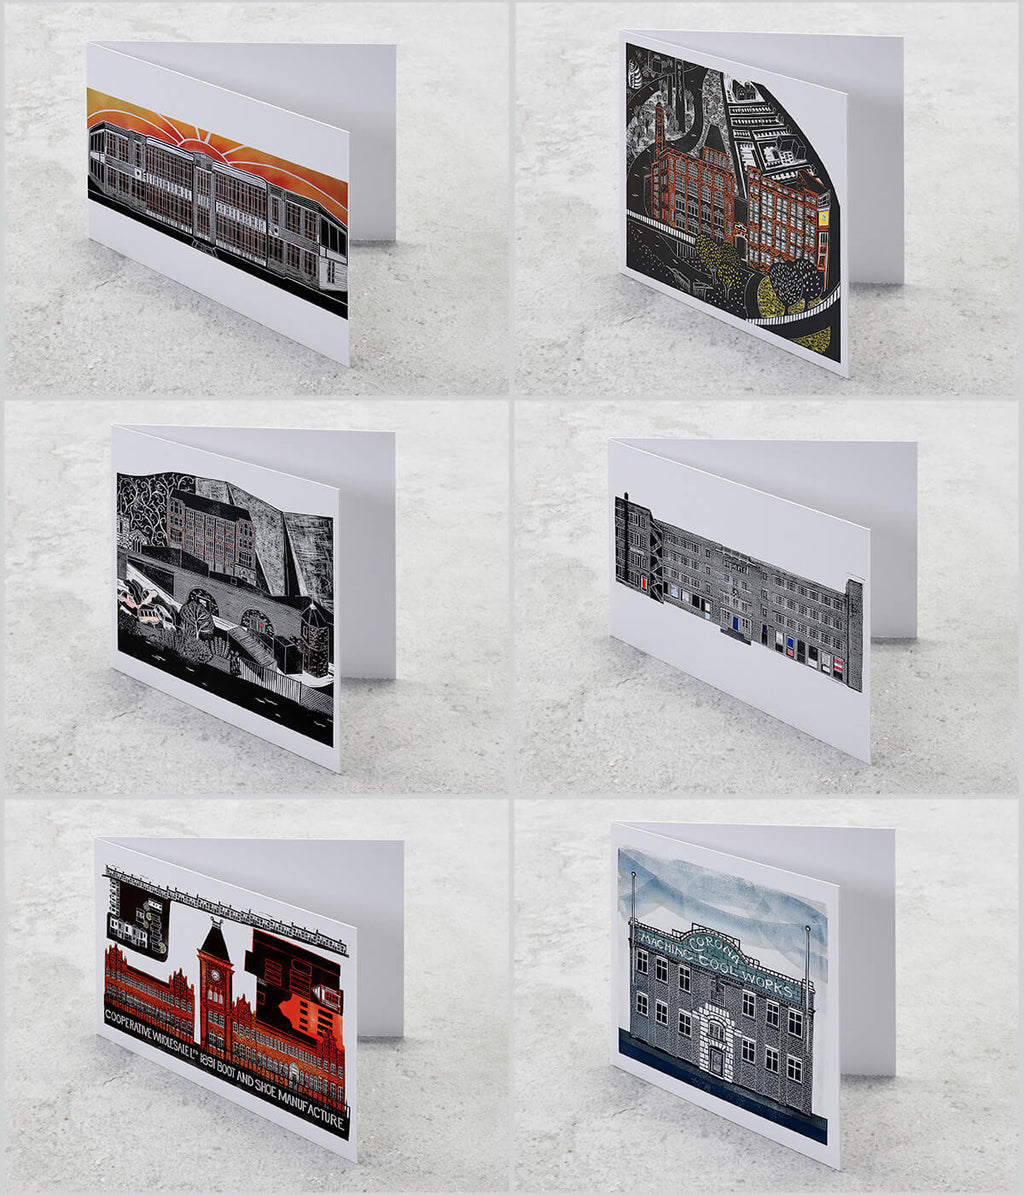 Industrial Leicester, pack of linocut greeting cards by Sarah Kirby